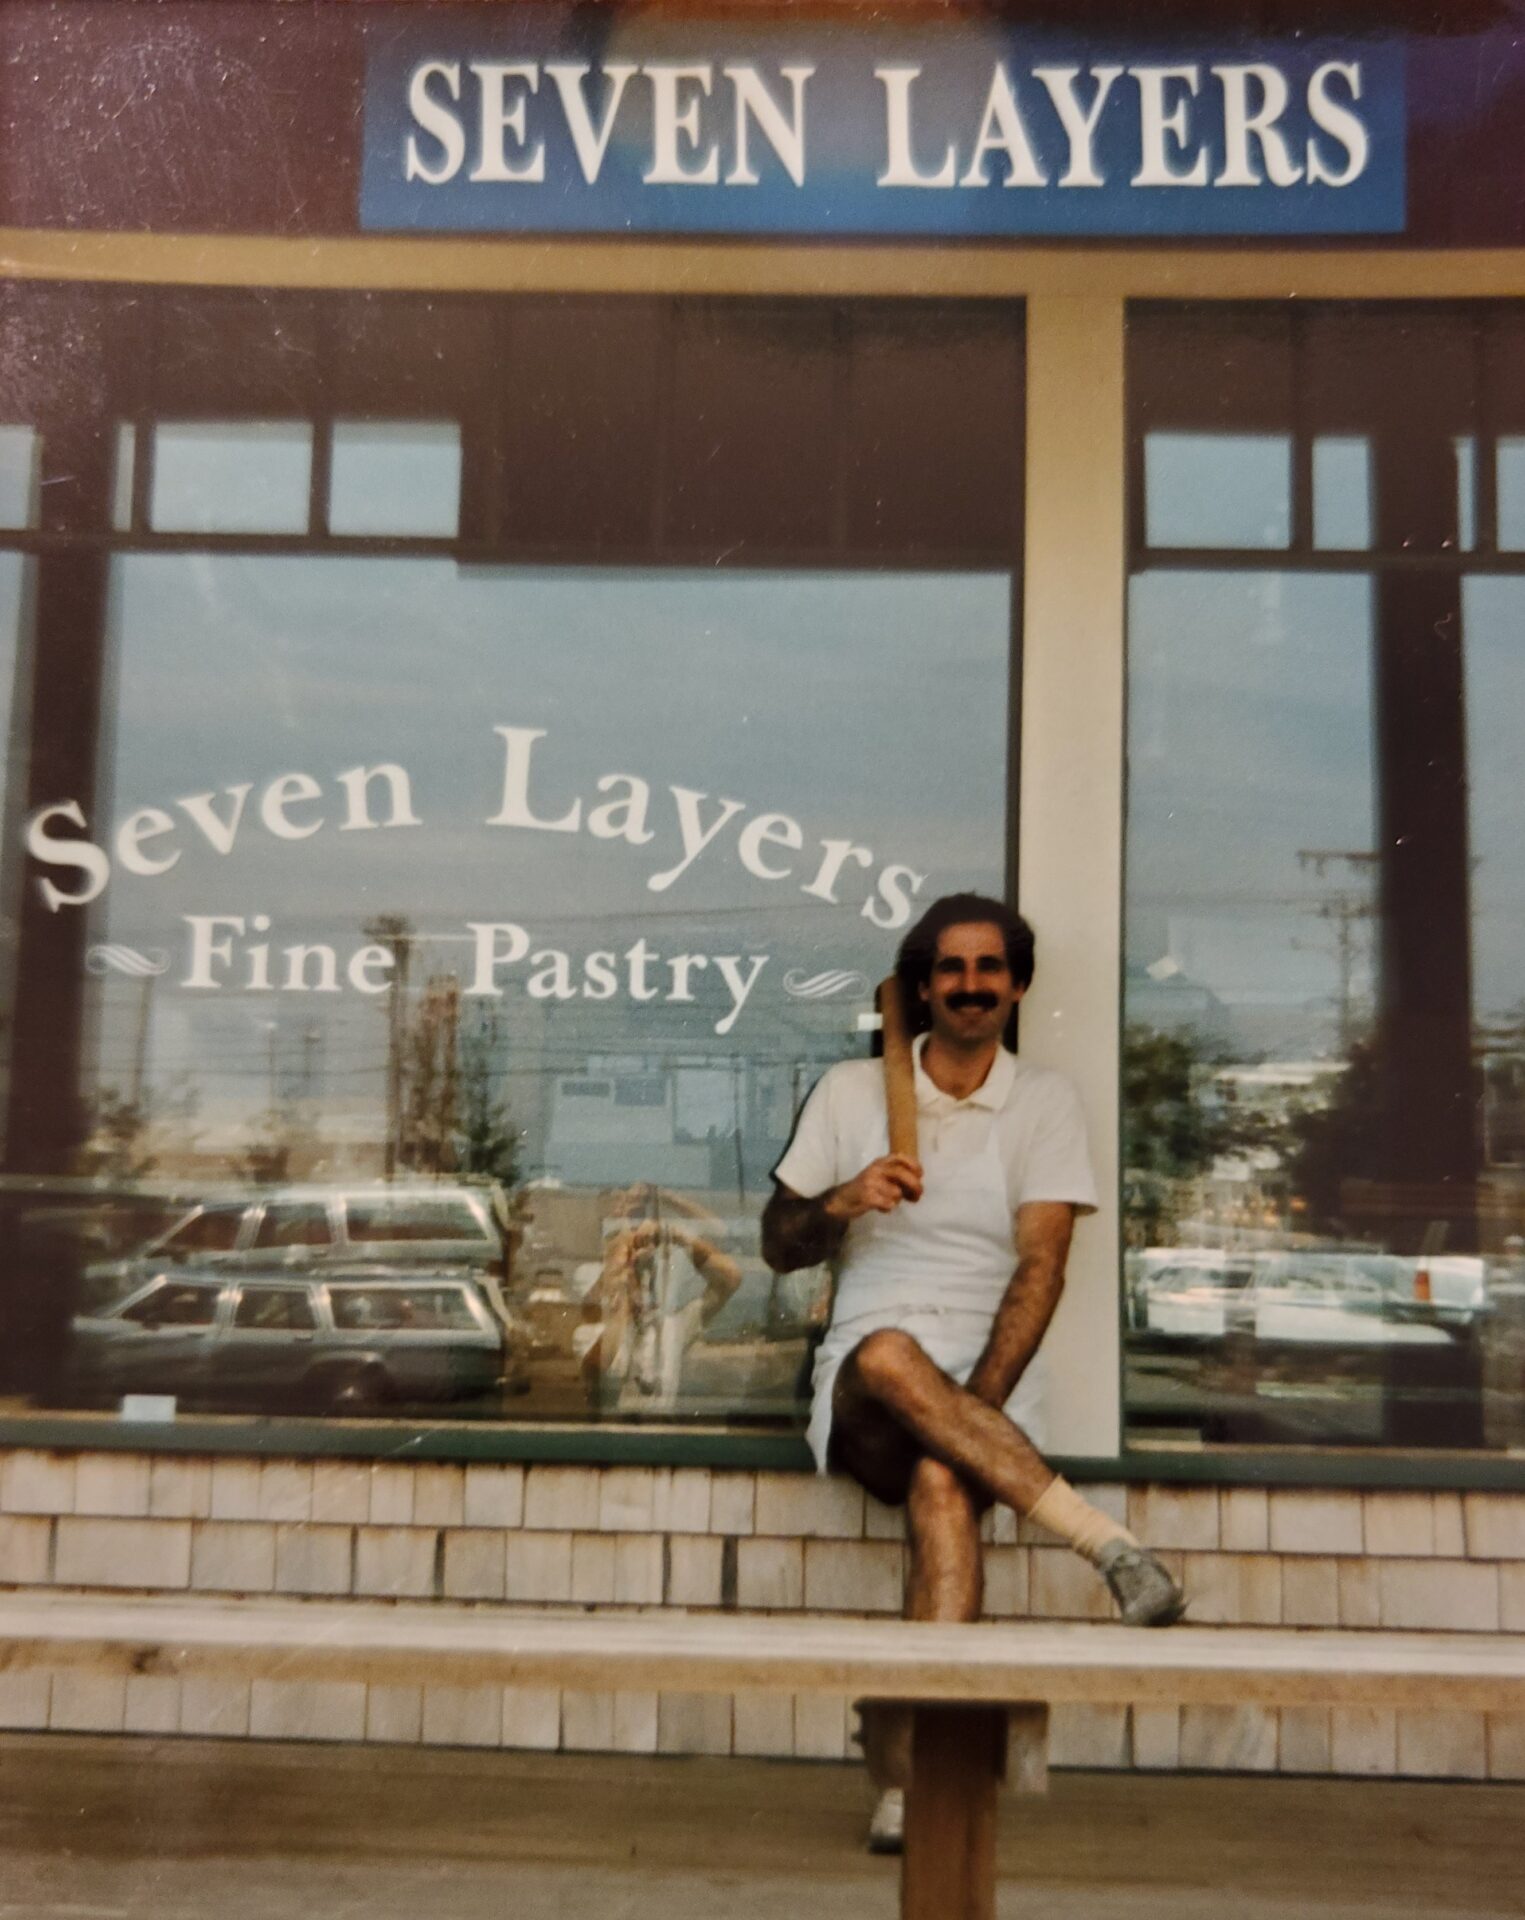 A man participating in The Friday Baking Project, sitting on a bench in front of a bakery.